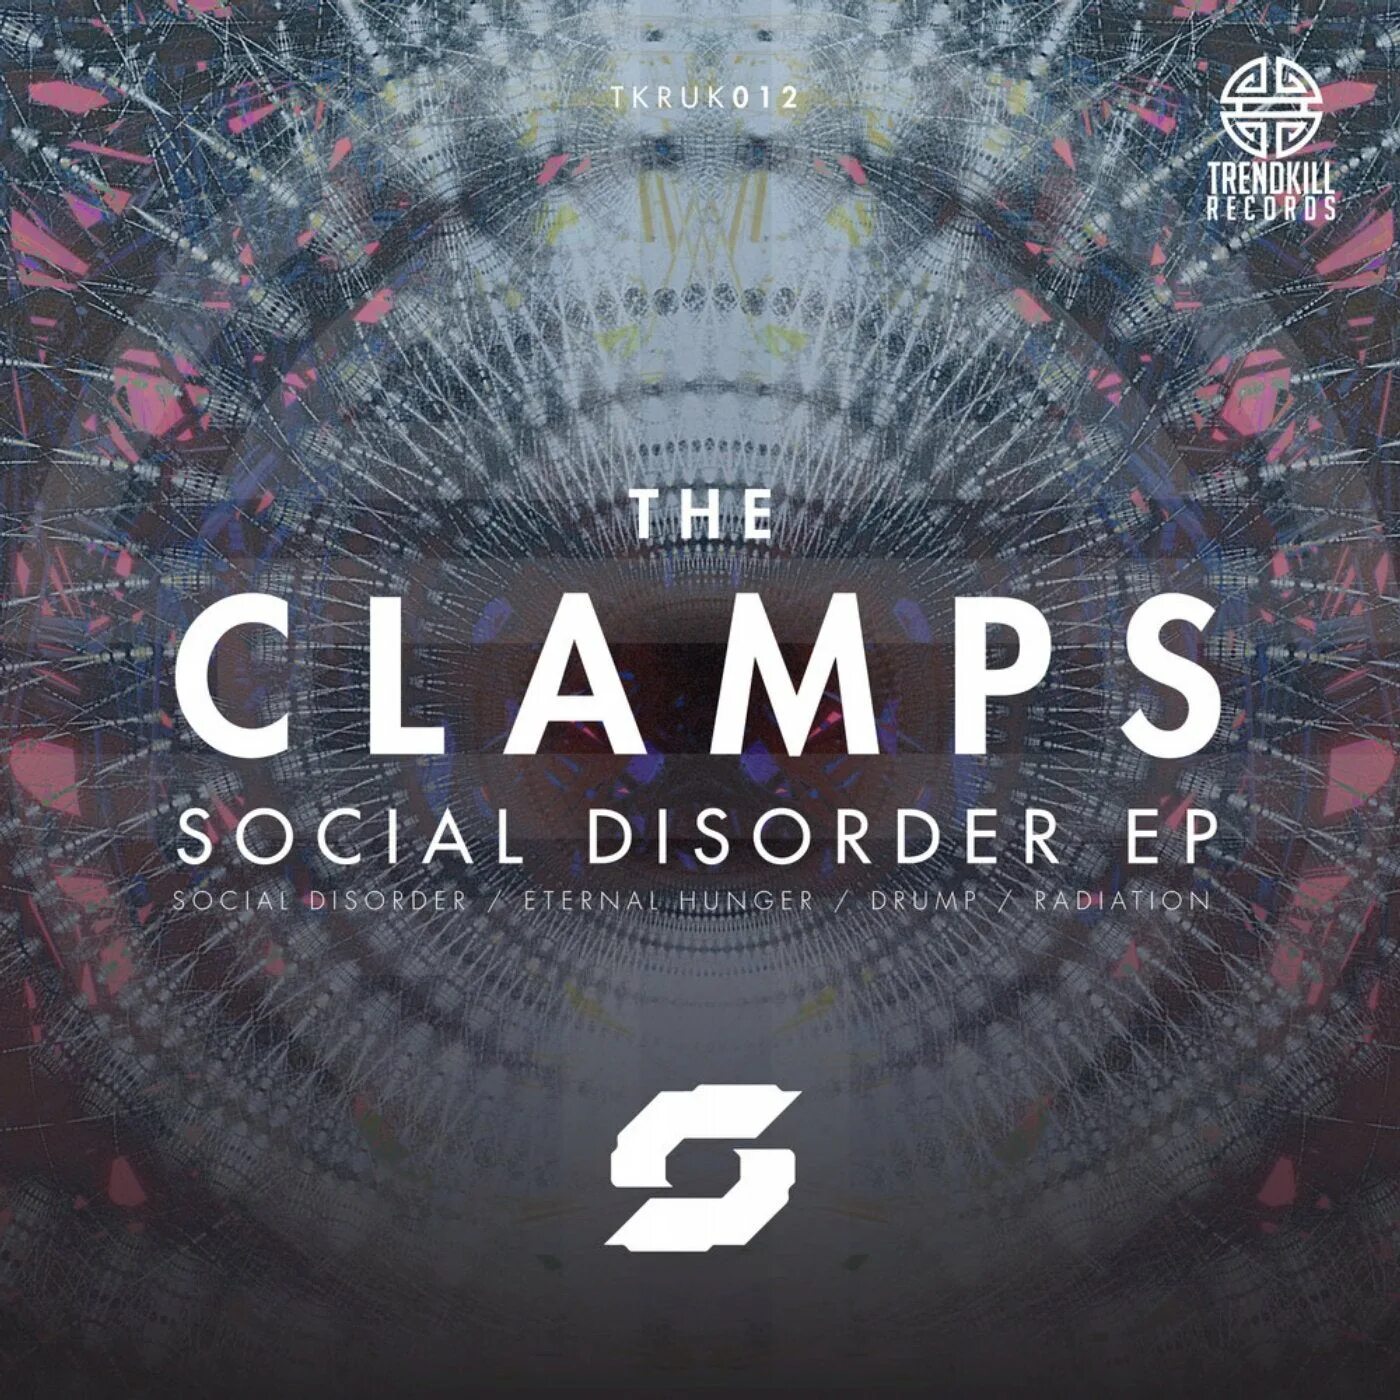 Clamp. Social Disorder. The Clamps DNB. Eternal Hunger.